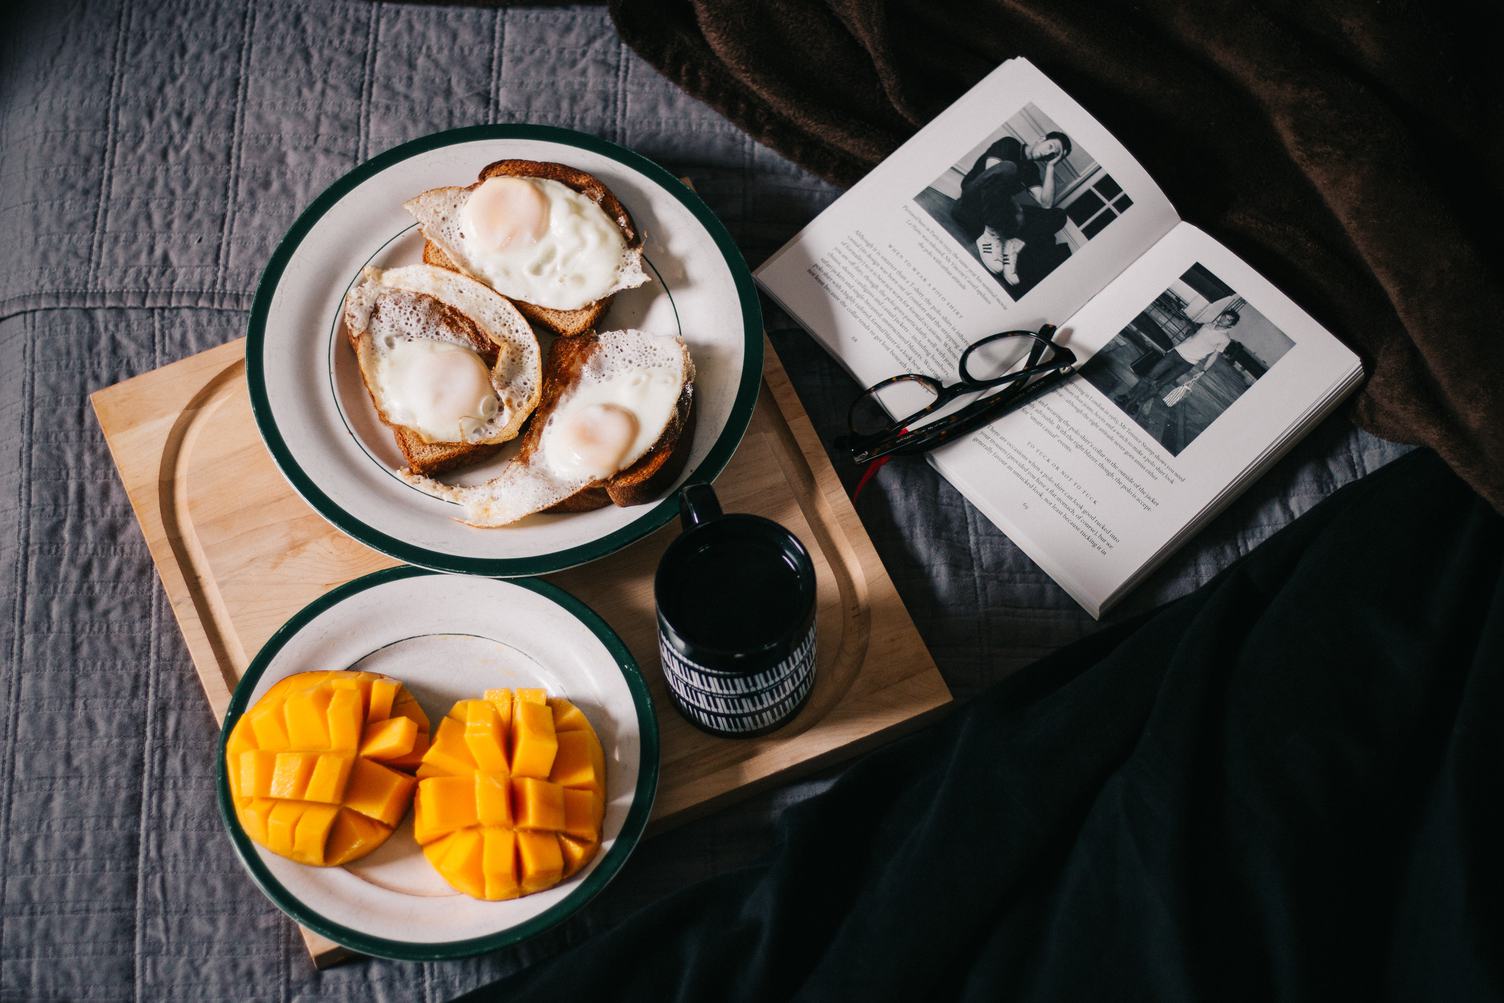 Book and Breakfast on the Wood Tray in Bed